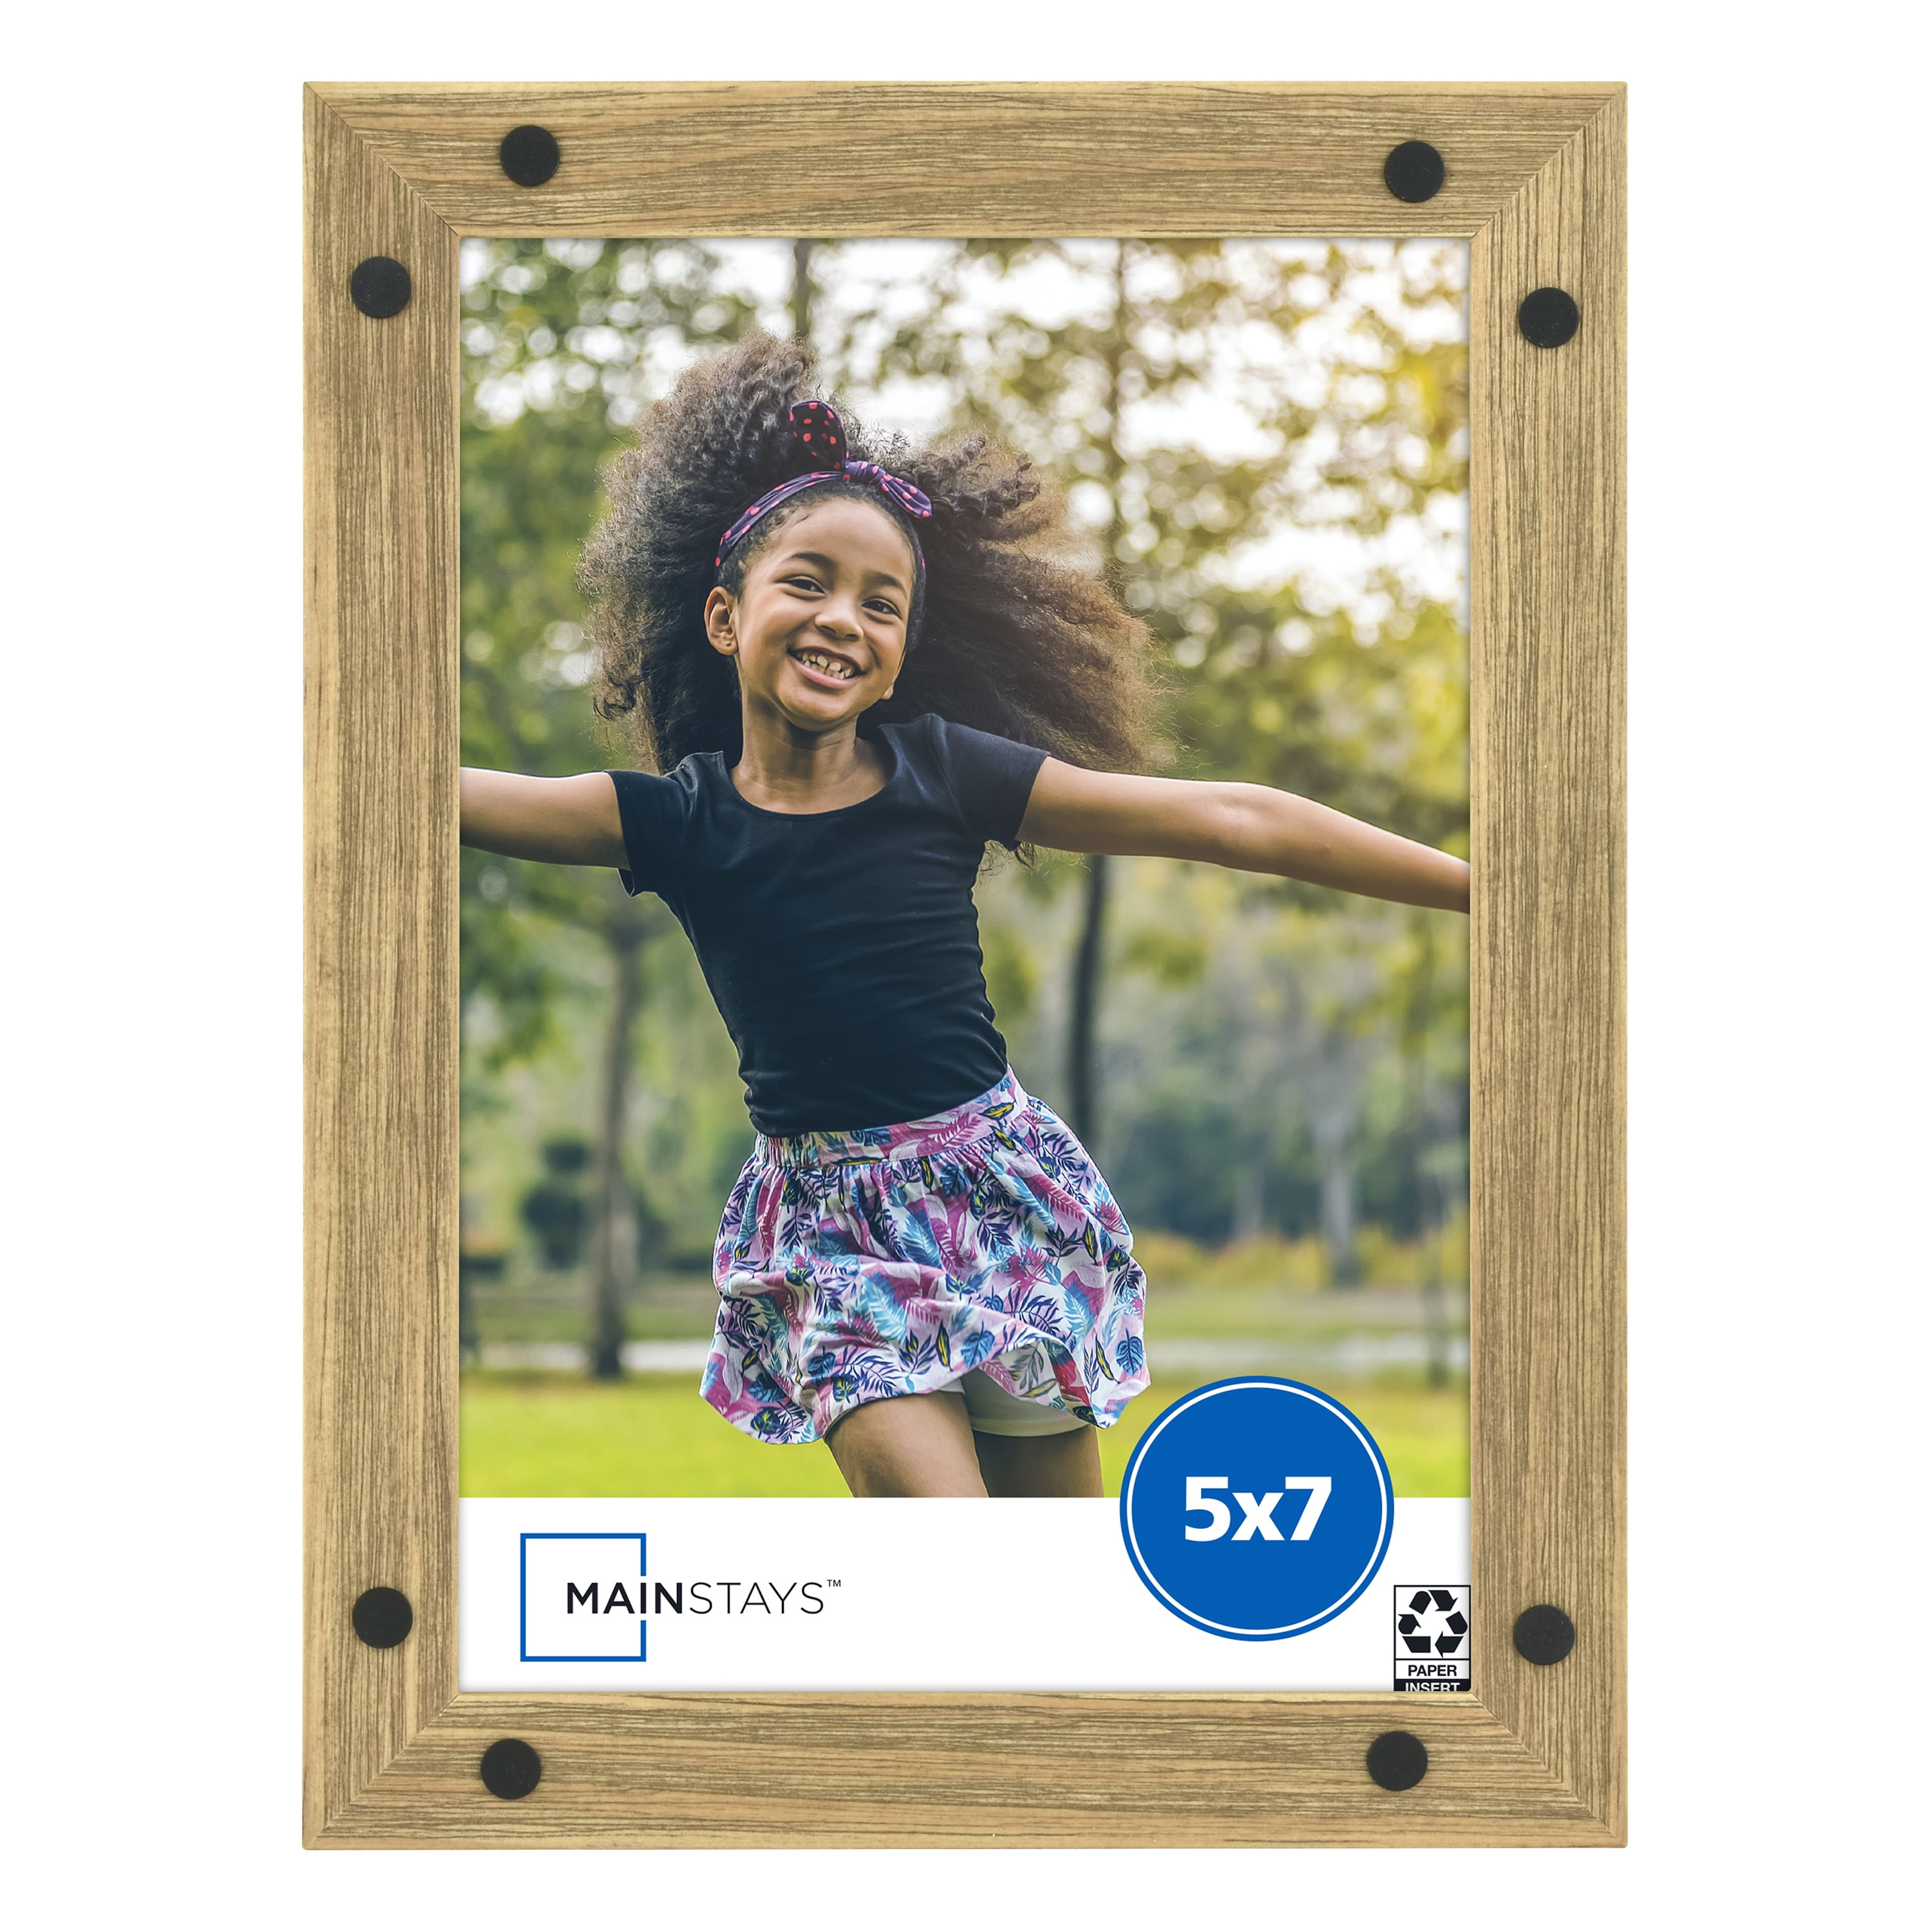 Mainstays 5" x 7" Natural Wood with Black Rivets Tabletop Picture Frame